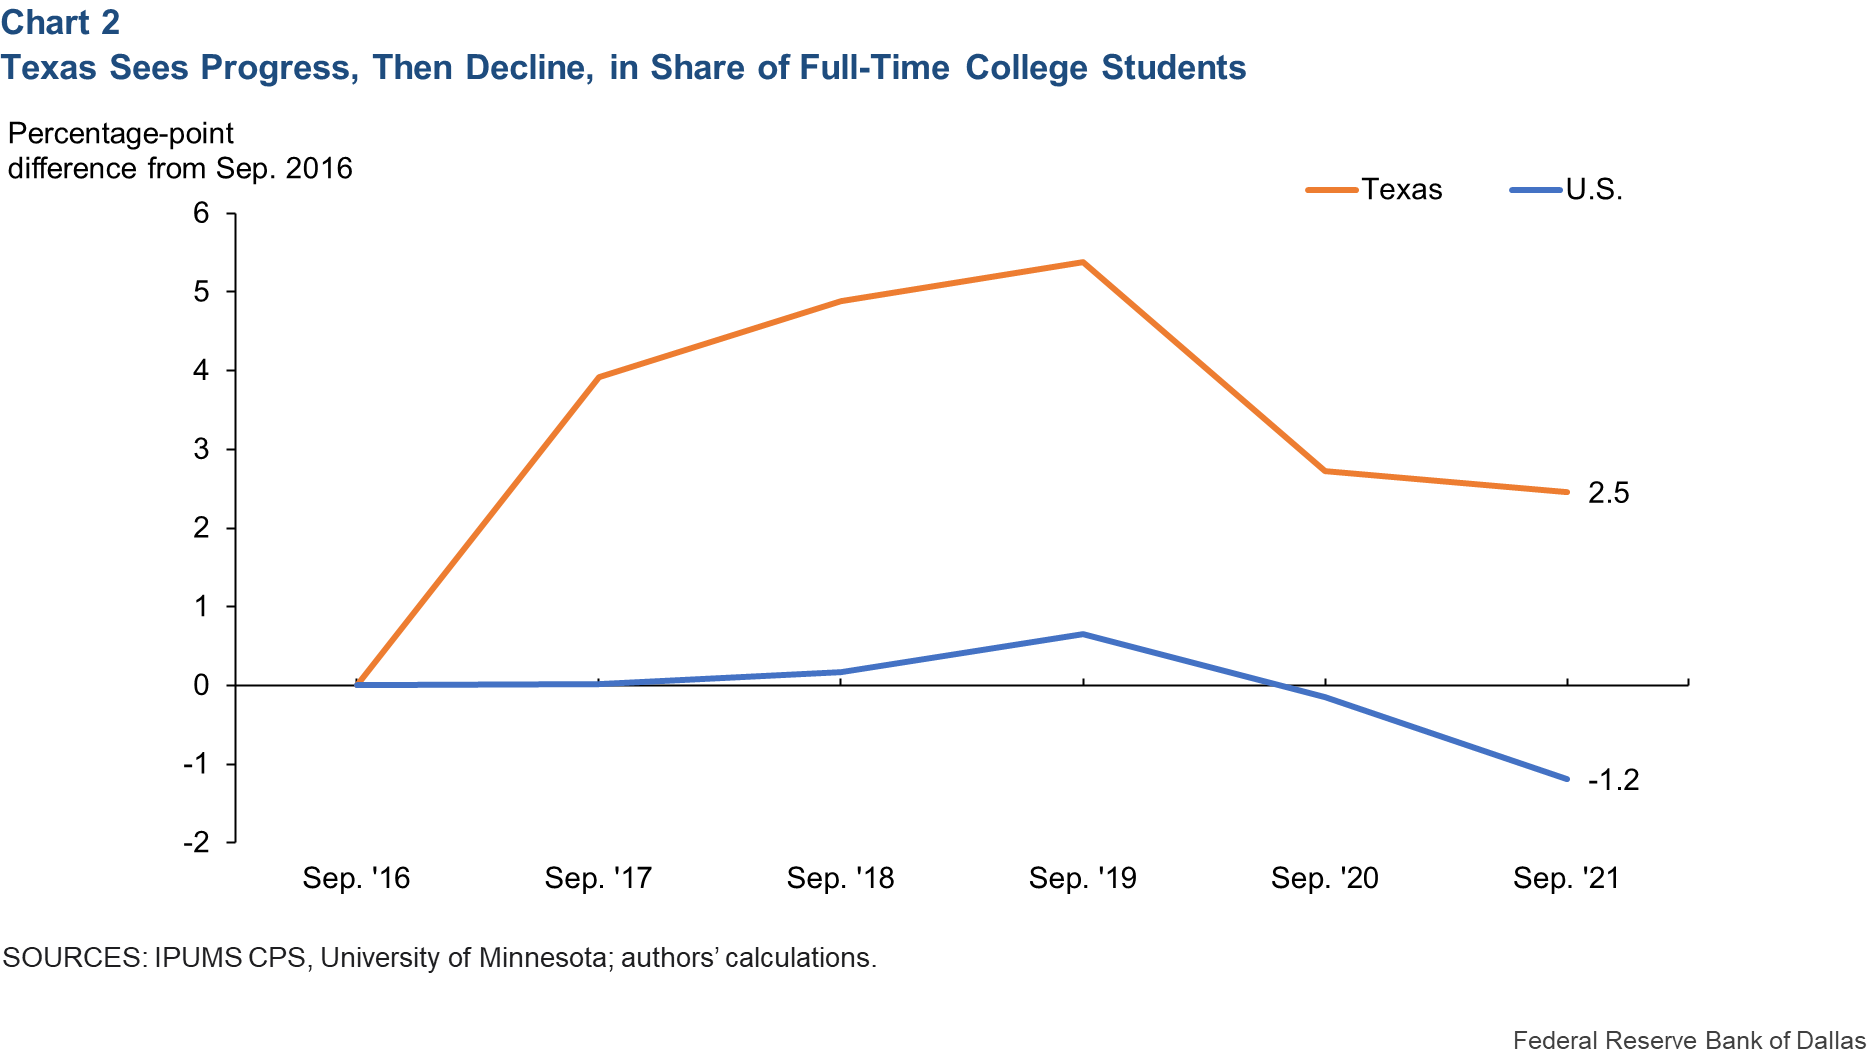 Texas Sees Progress, Then Decline, in Share of Full-Time College Students